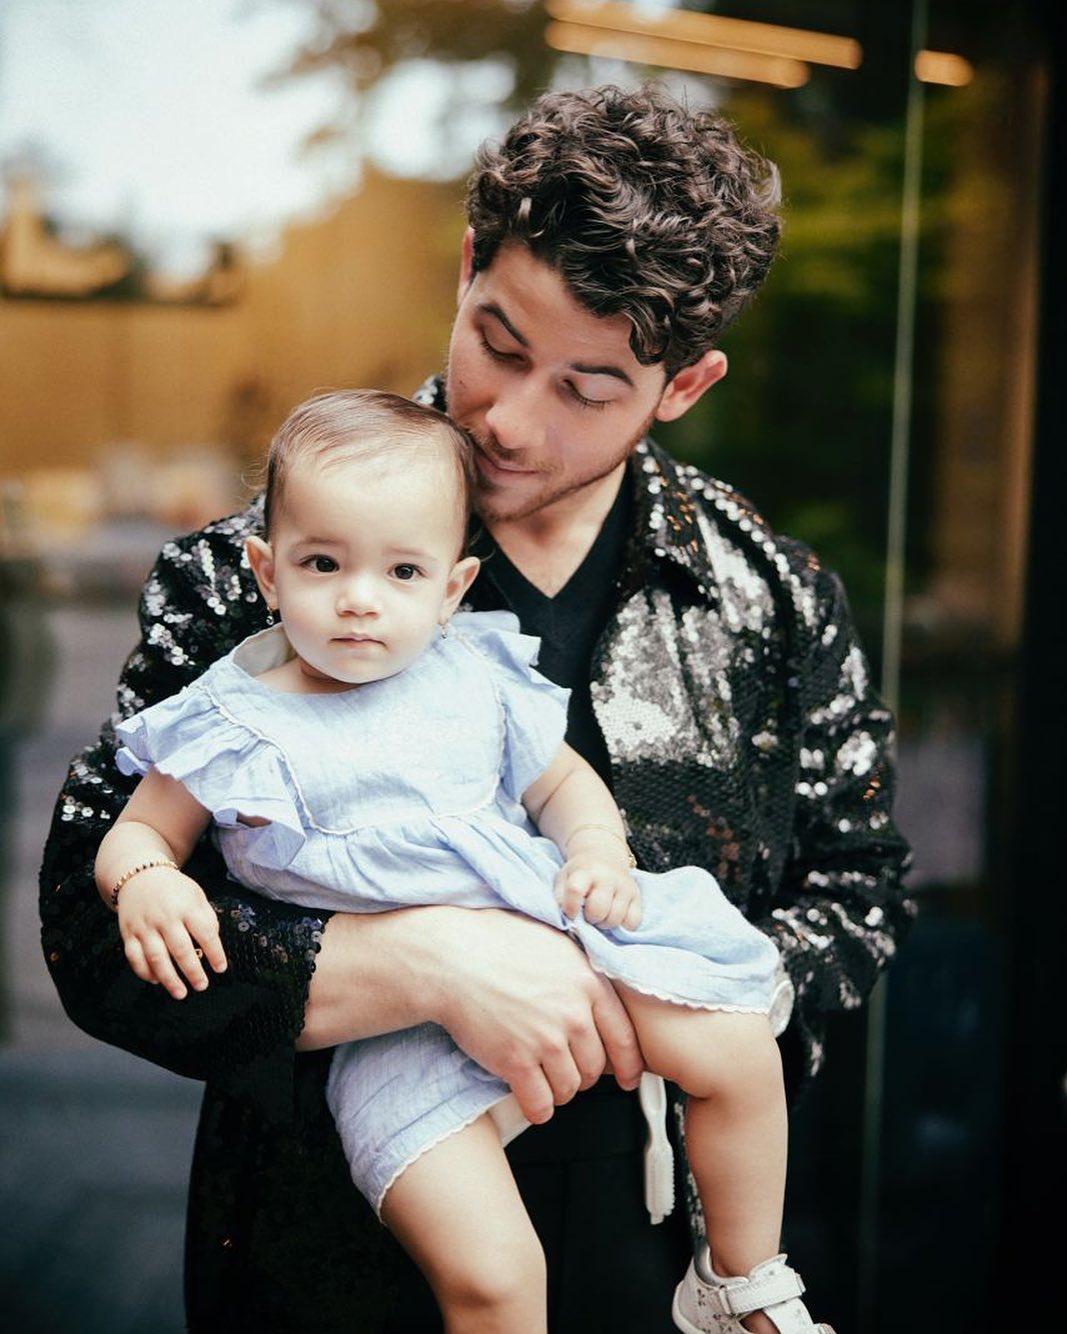 Nick Jonas dotes on daughter Malti in sweet picture